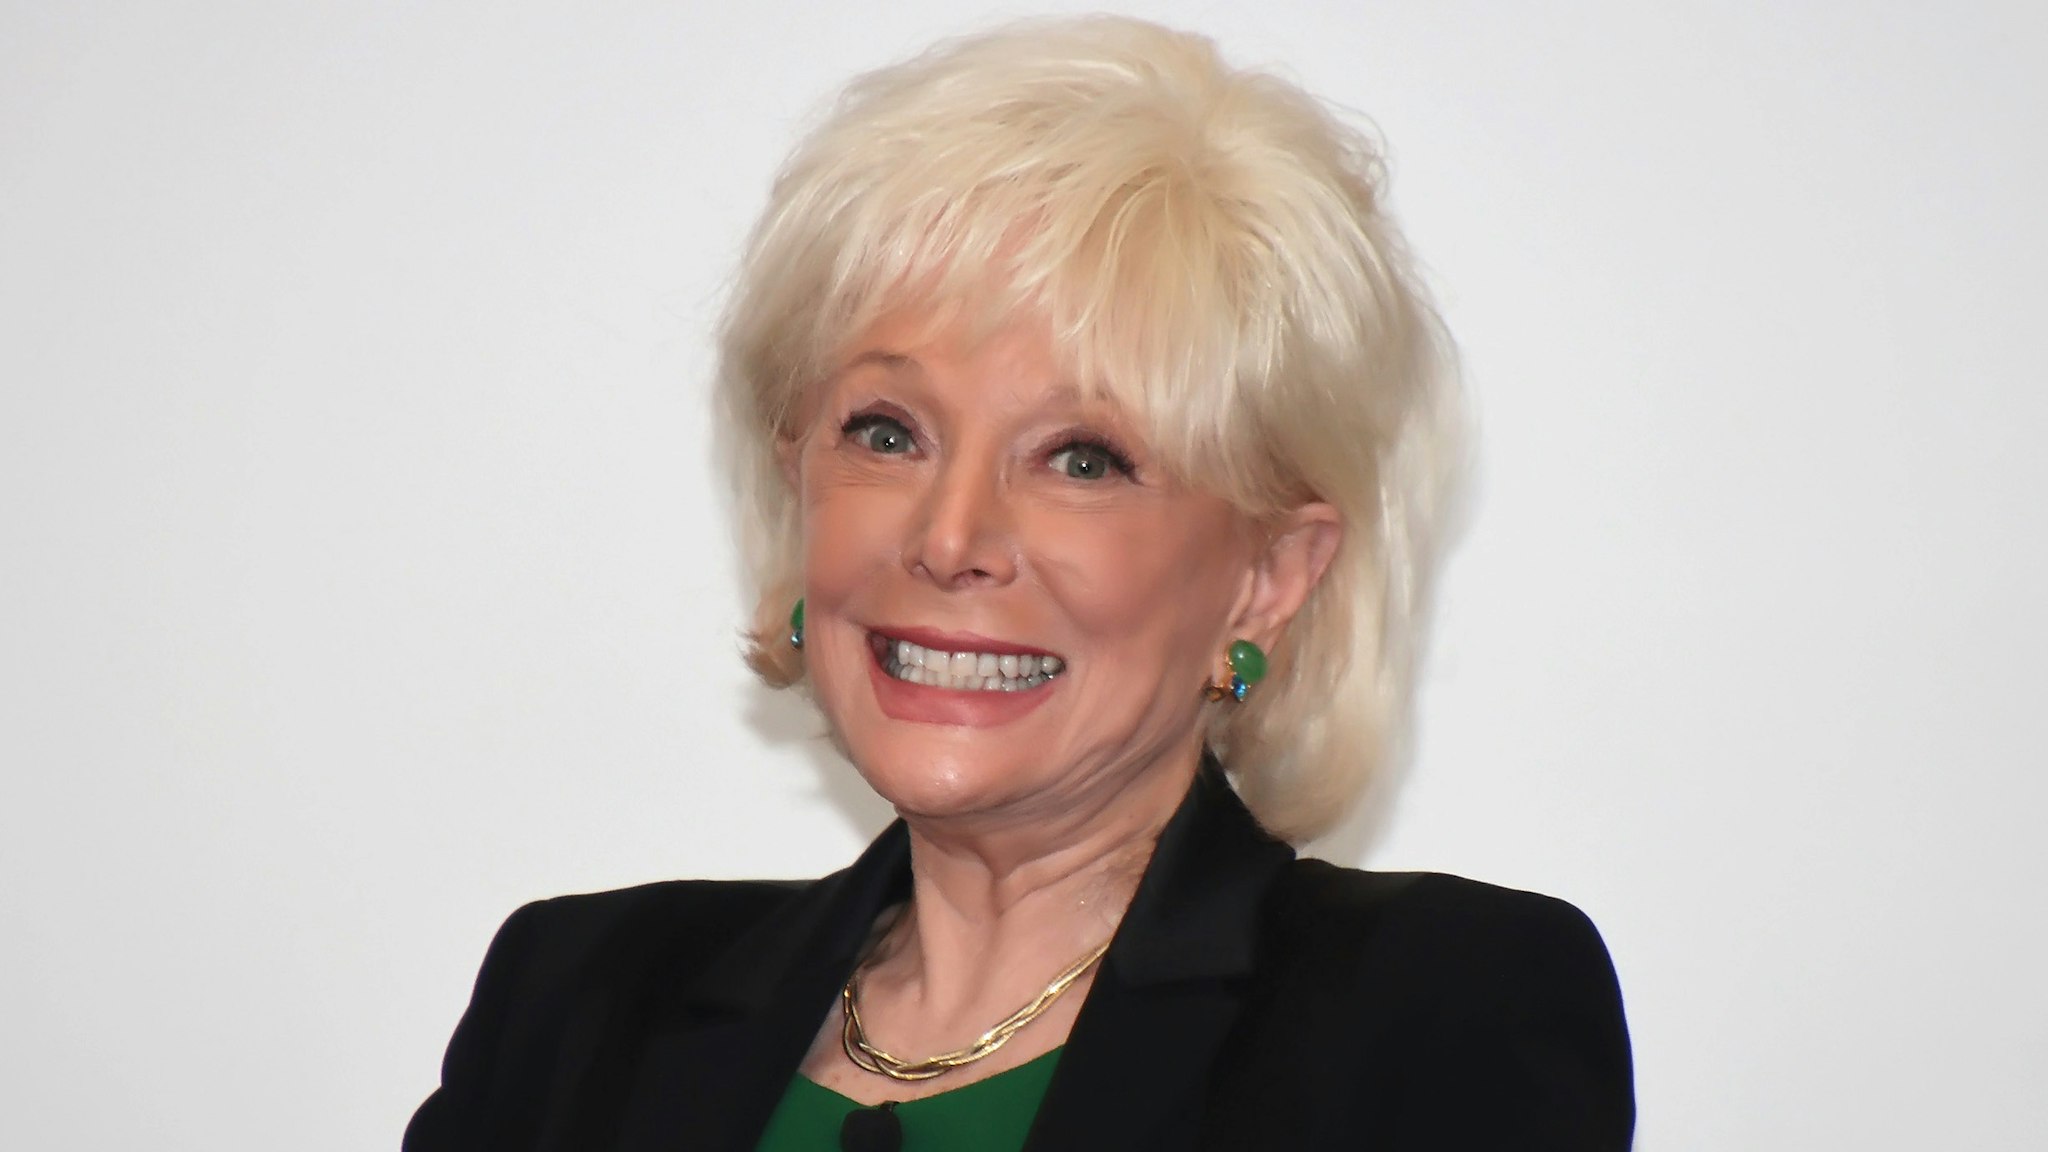 VINELAND, NJ - FEBRUARY 13: Keynote speaker Lesley Stahl, co-editor of CBS 60 Minutes, is interviewed during the luncheon at the 2020 "Working Together For Working Families Conference held at Luciano Conference" Center at Cumberland County College on February 13, 2020 in Vineland, New Jersey.